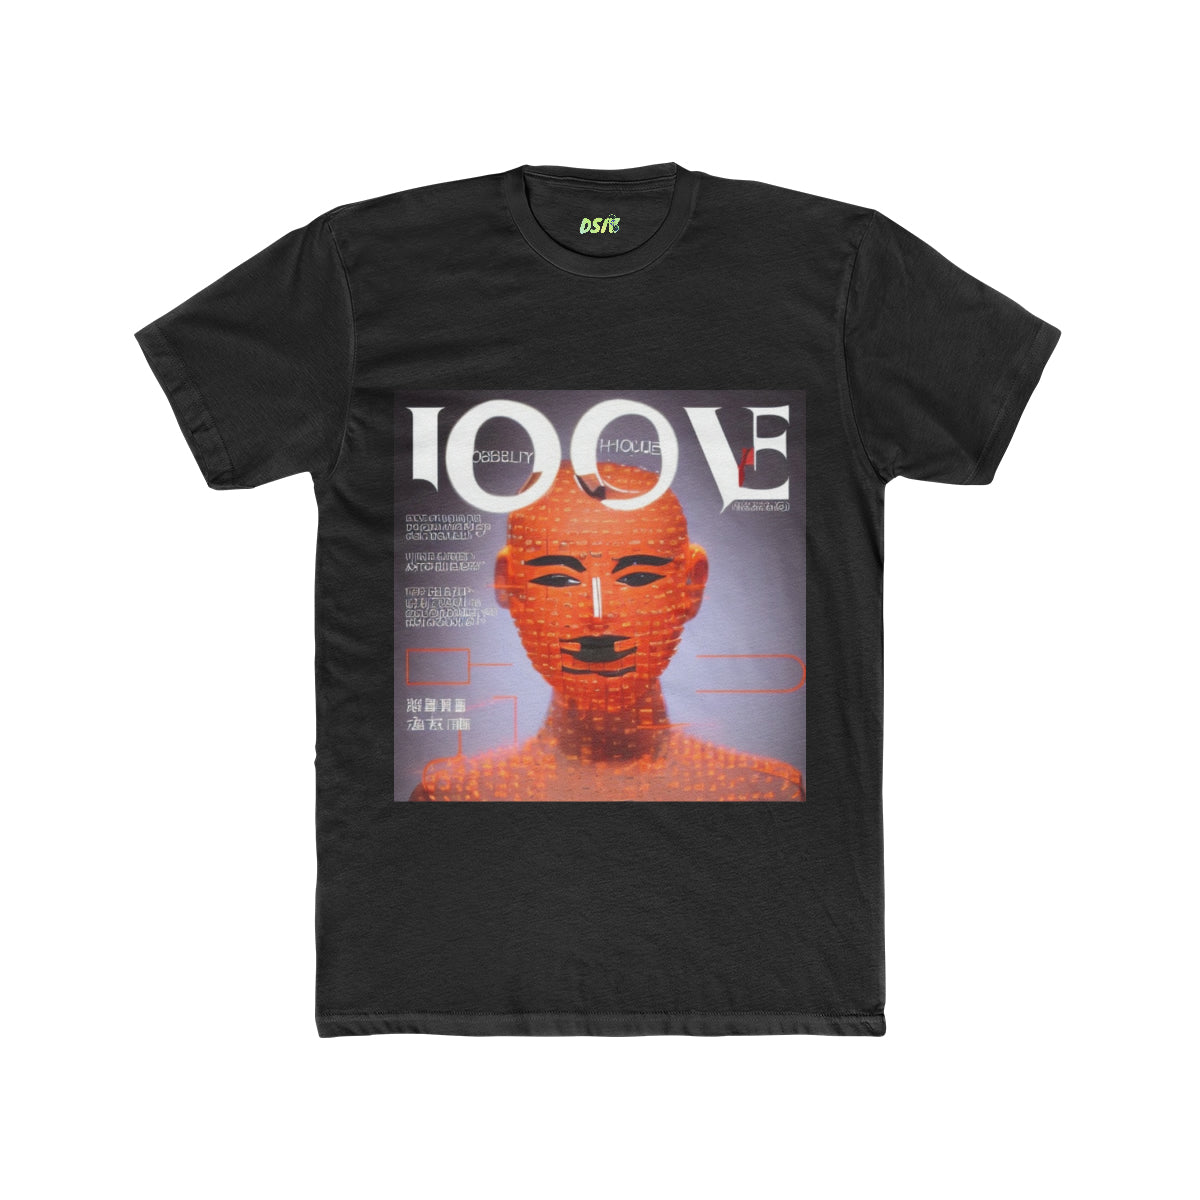 IOOVE - Made In Orange Lights - Magazine Cover Collection - DSIV